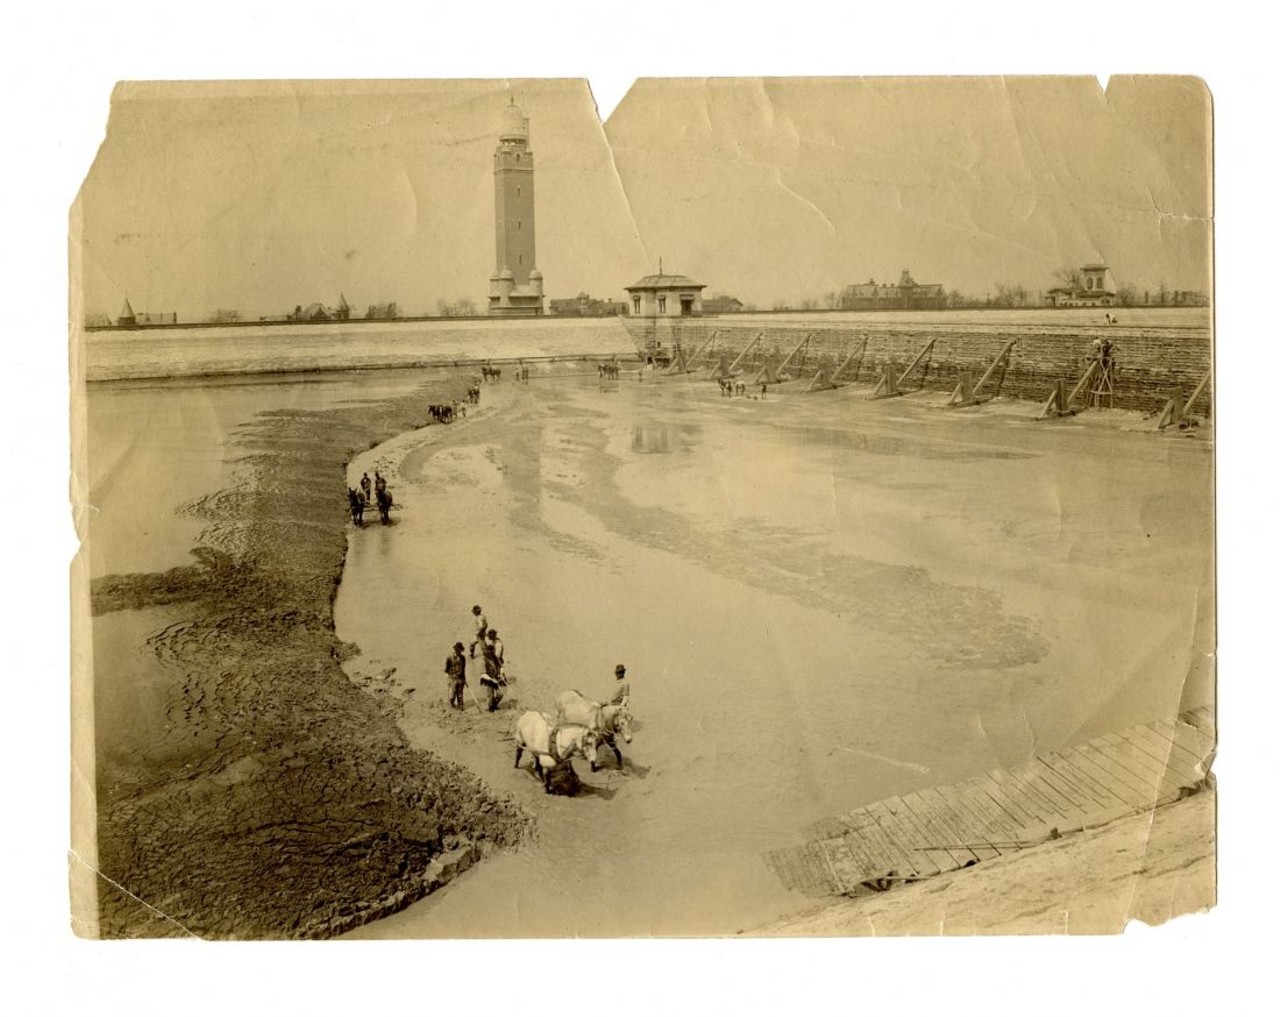 CLEANING MUD FROM THE COMPTON HILL RESERVOIR, EARLY 1900s
"The 1871 St. Louis water system provided citizens with reliable water, but it still wasn't clean. Periodically the city reservoirs had to be drained and feet of mud scraped from their bottoms." &#151; Andrew Wanko, 'Great River City'
Missouri Historical Society Collections